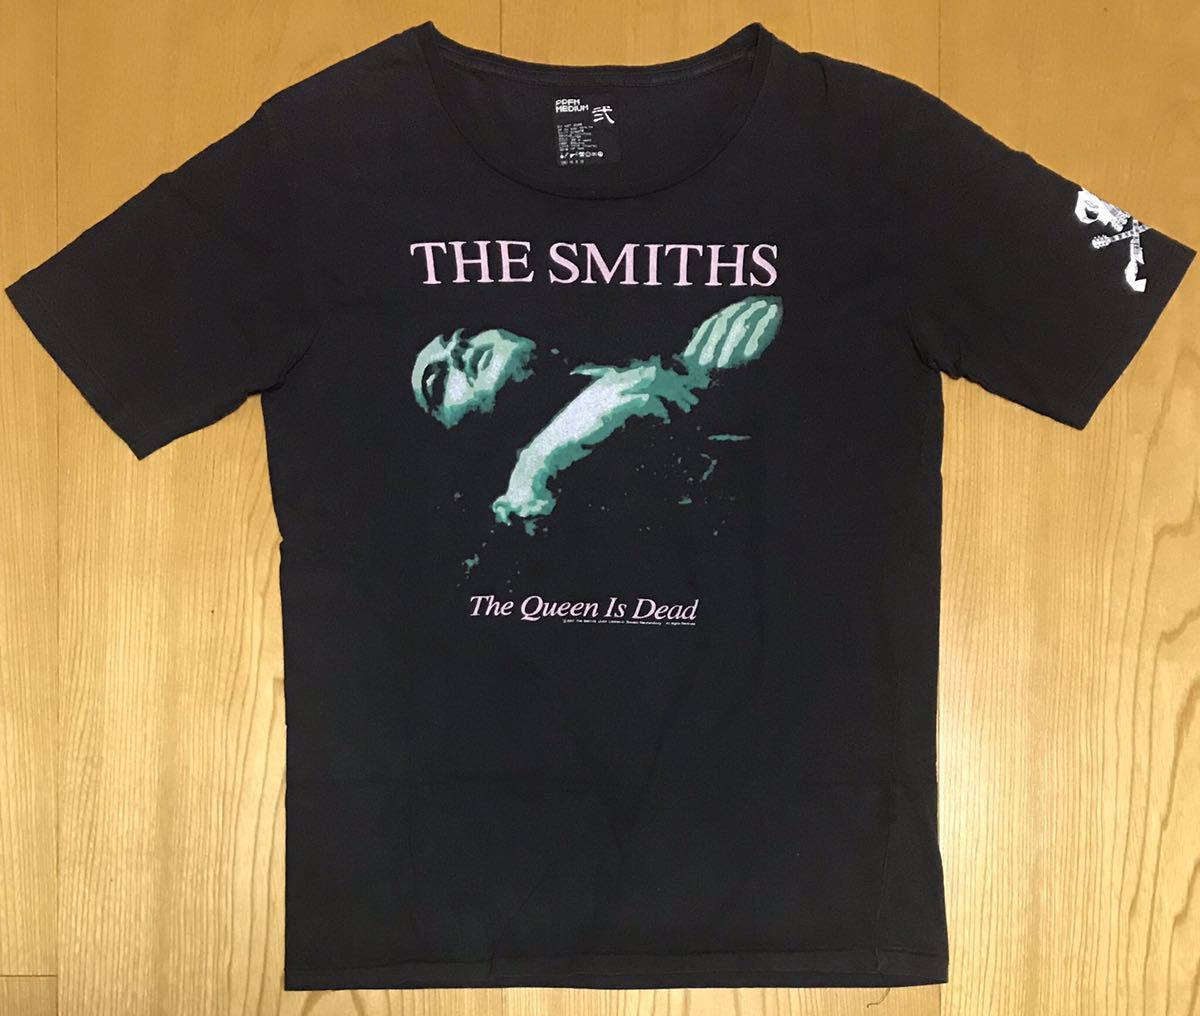 【 The Smiths x PPFM T-Shirt 】Queen Is Dead Morrissey Official Brit Pop Indie Rock Rough Trade Tシャツ ザ・スミス モリッシー レア